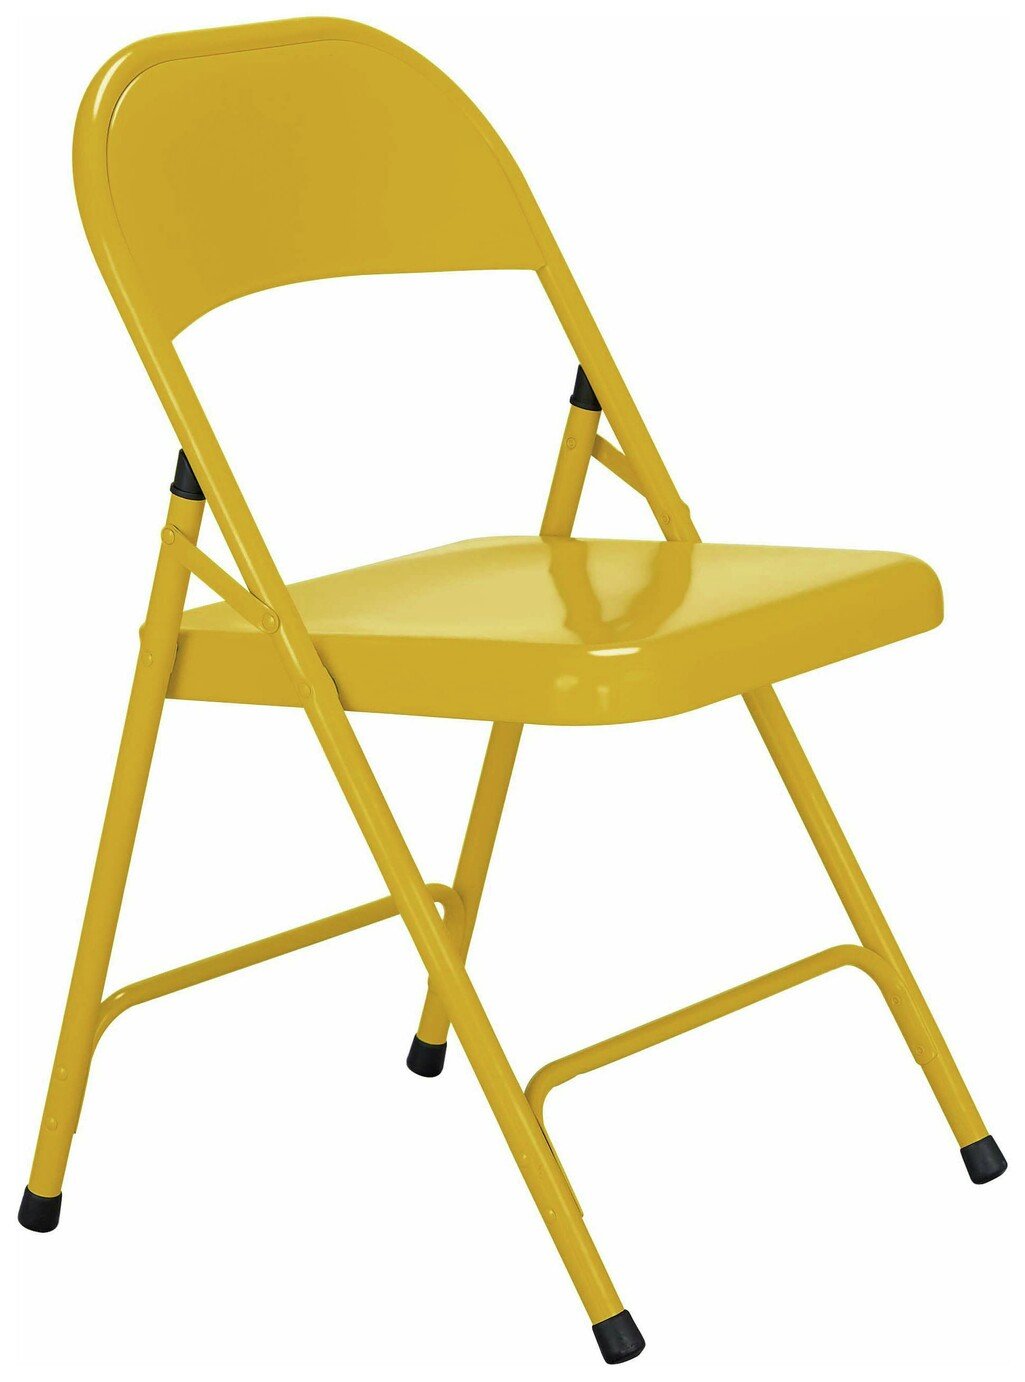 where can i buy folding chairs